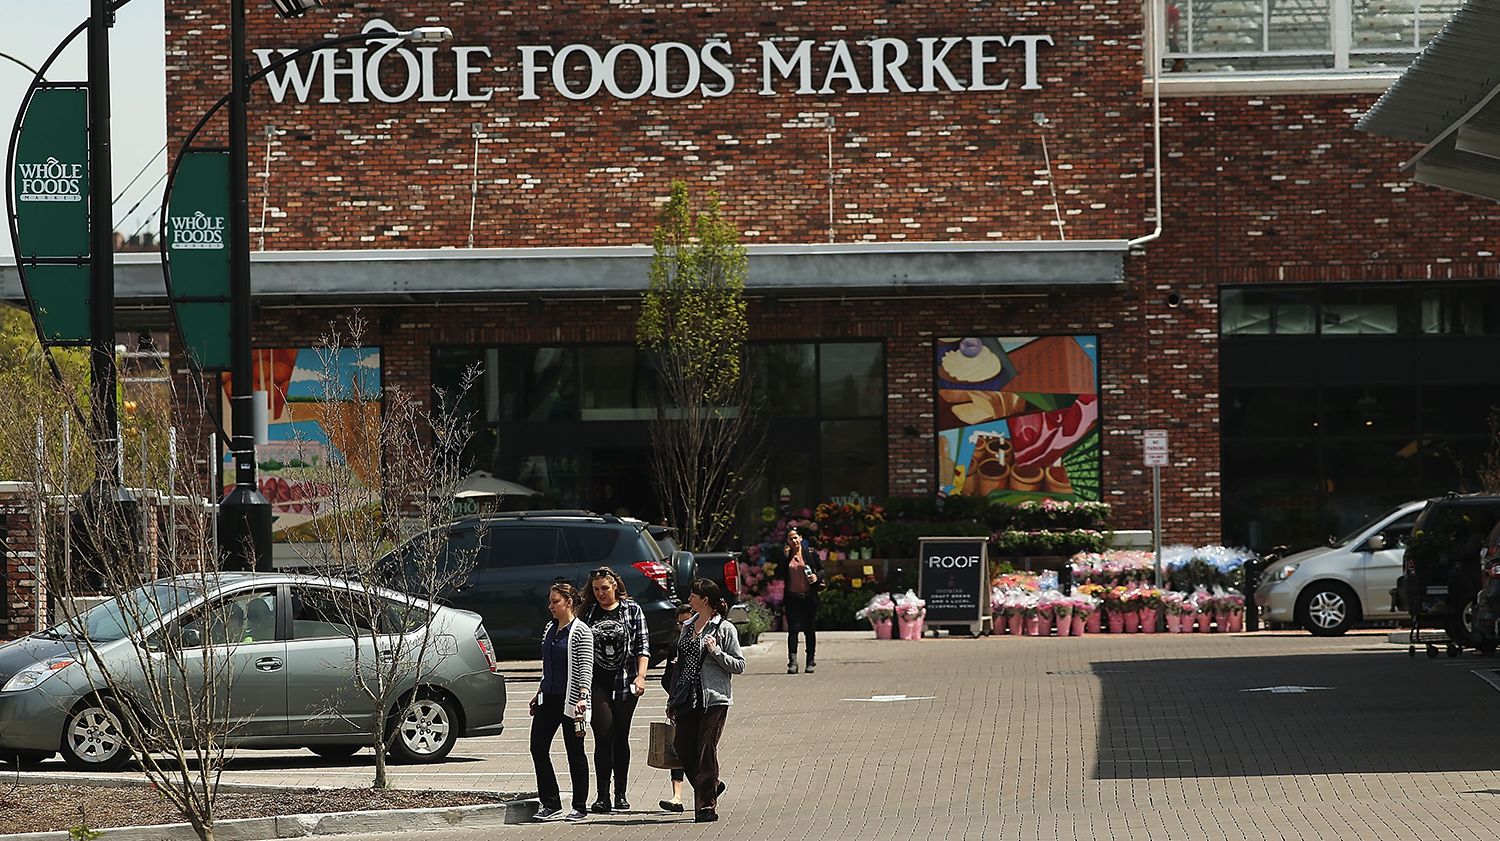 16 Organic Facts About Whole Foods